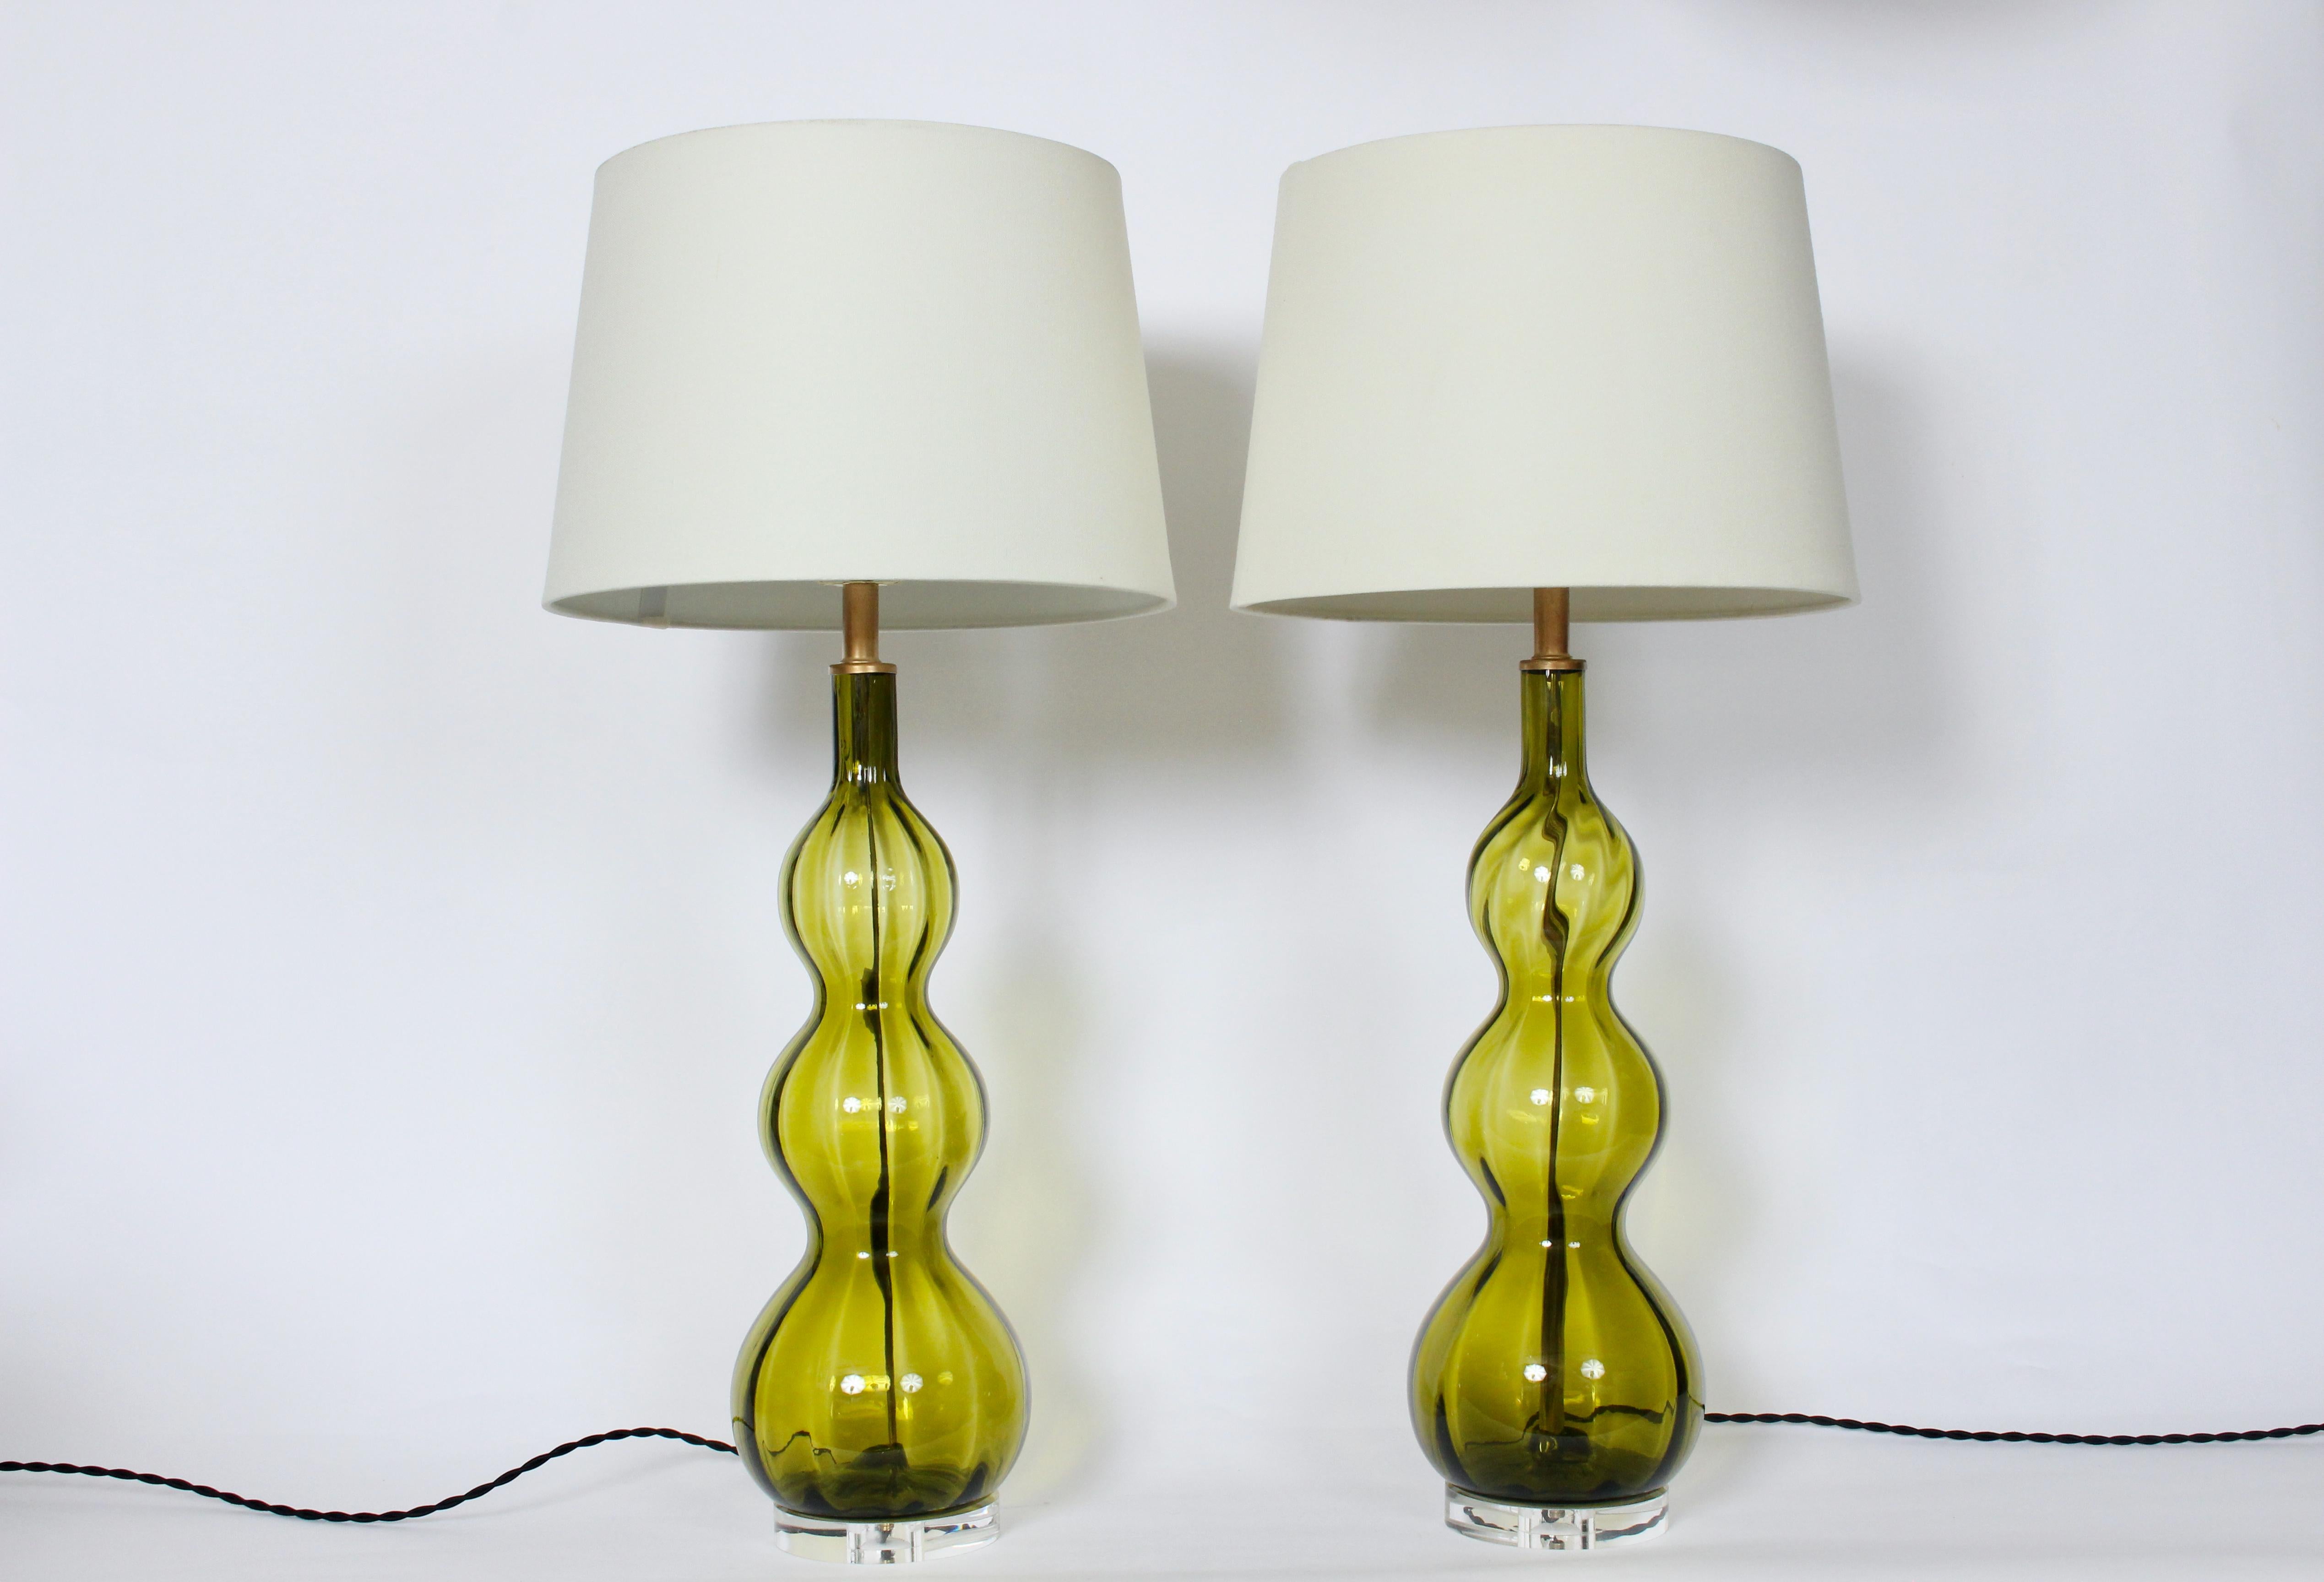 Tall Pair of Stacked Triple Gourd Olive Green Art Glass Table Lamps, 1950s For Sale 10